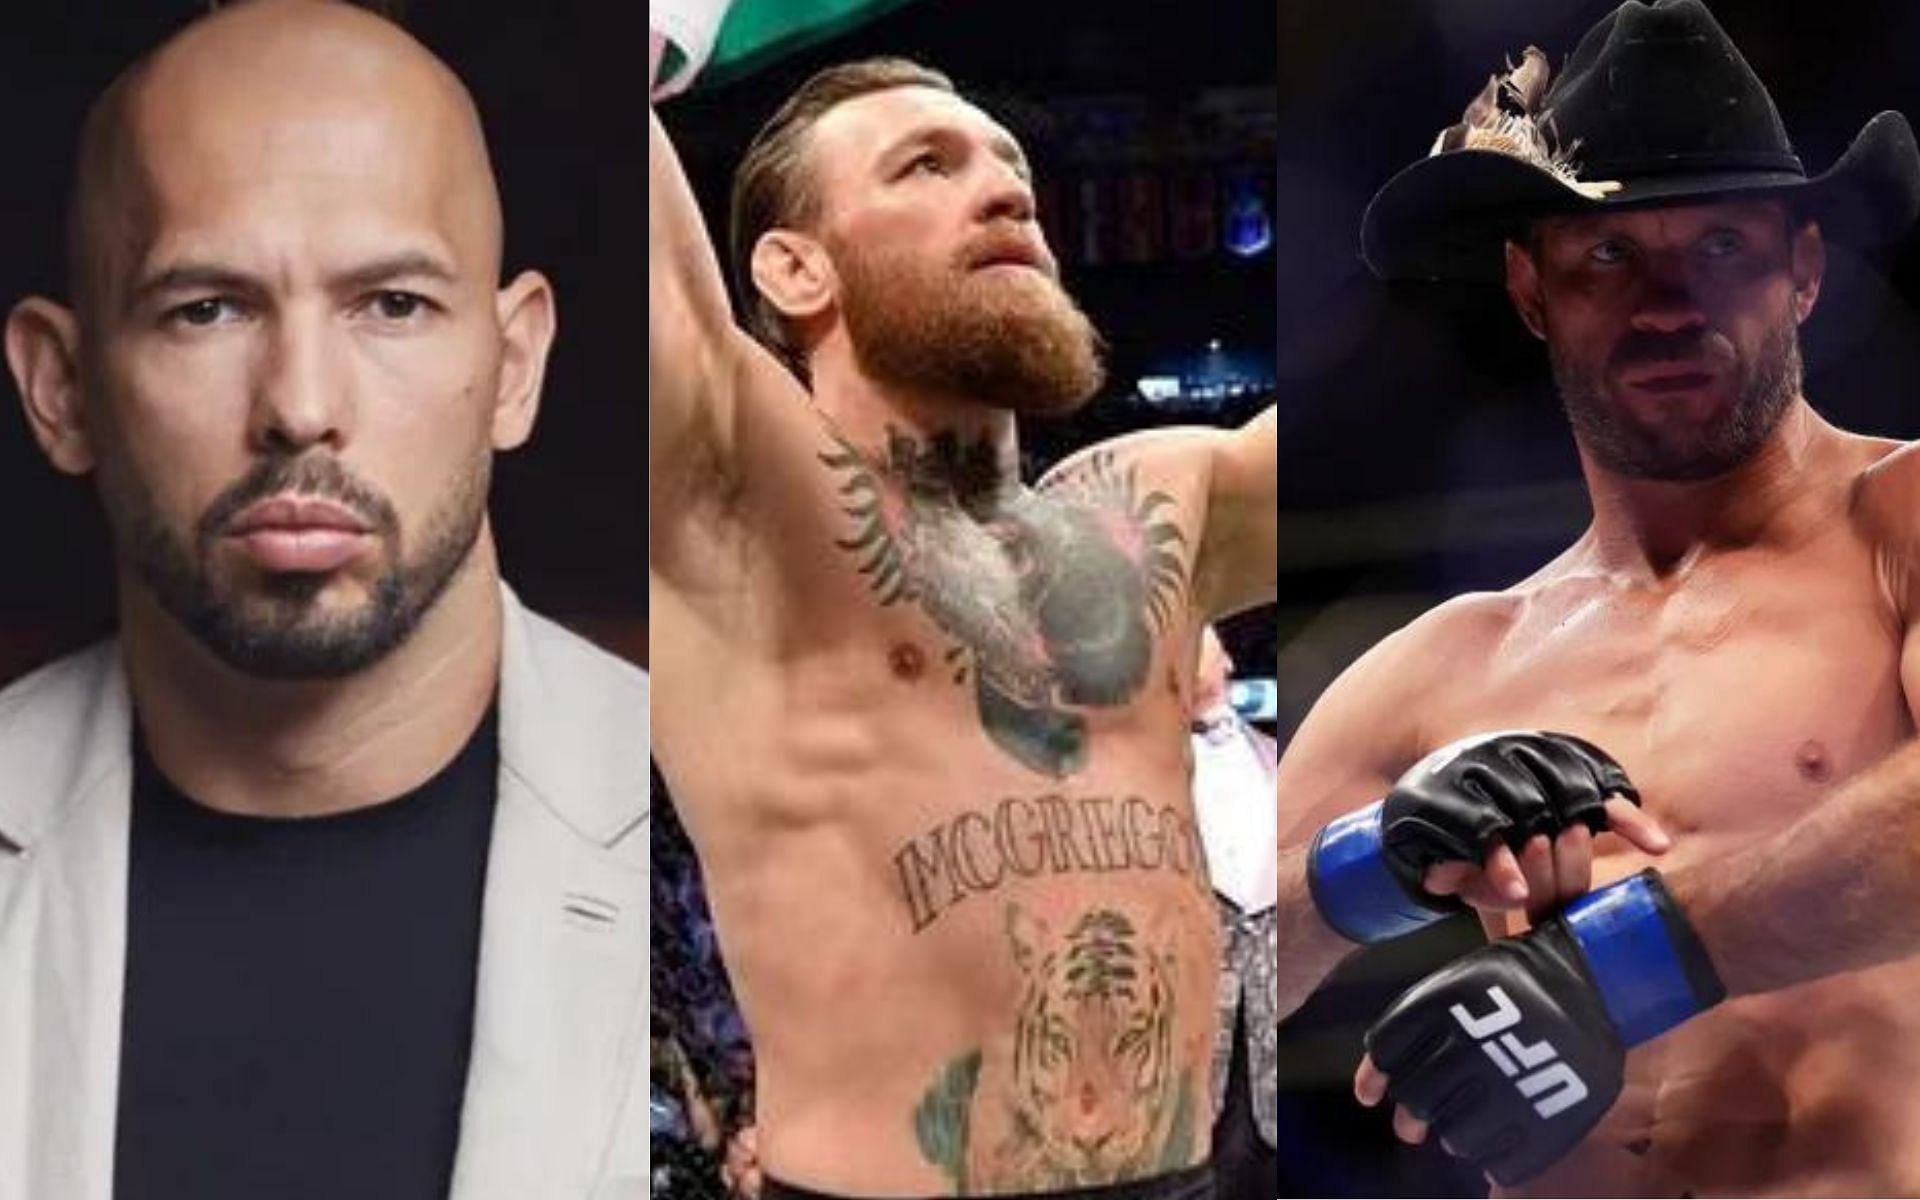 Andrew Tate (left), Conor McGregor (center) and Donald Cerrone (right) (Image credits @SpinninBackfist, @Dexerto, and @AOUREDOO on Twitter)